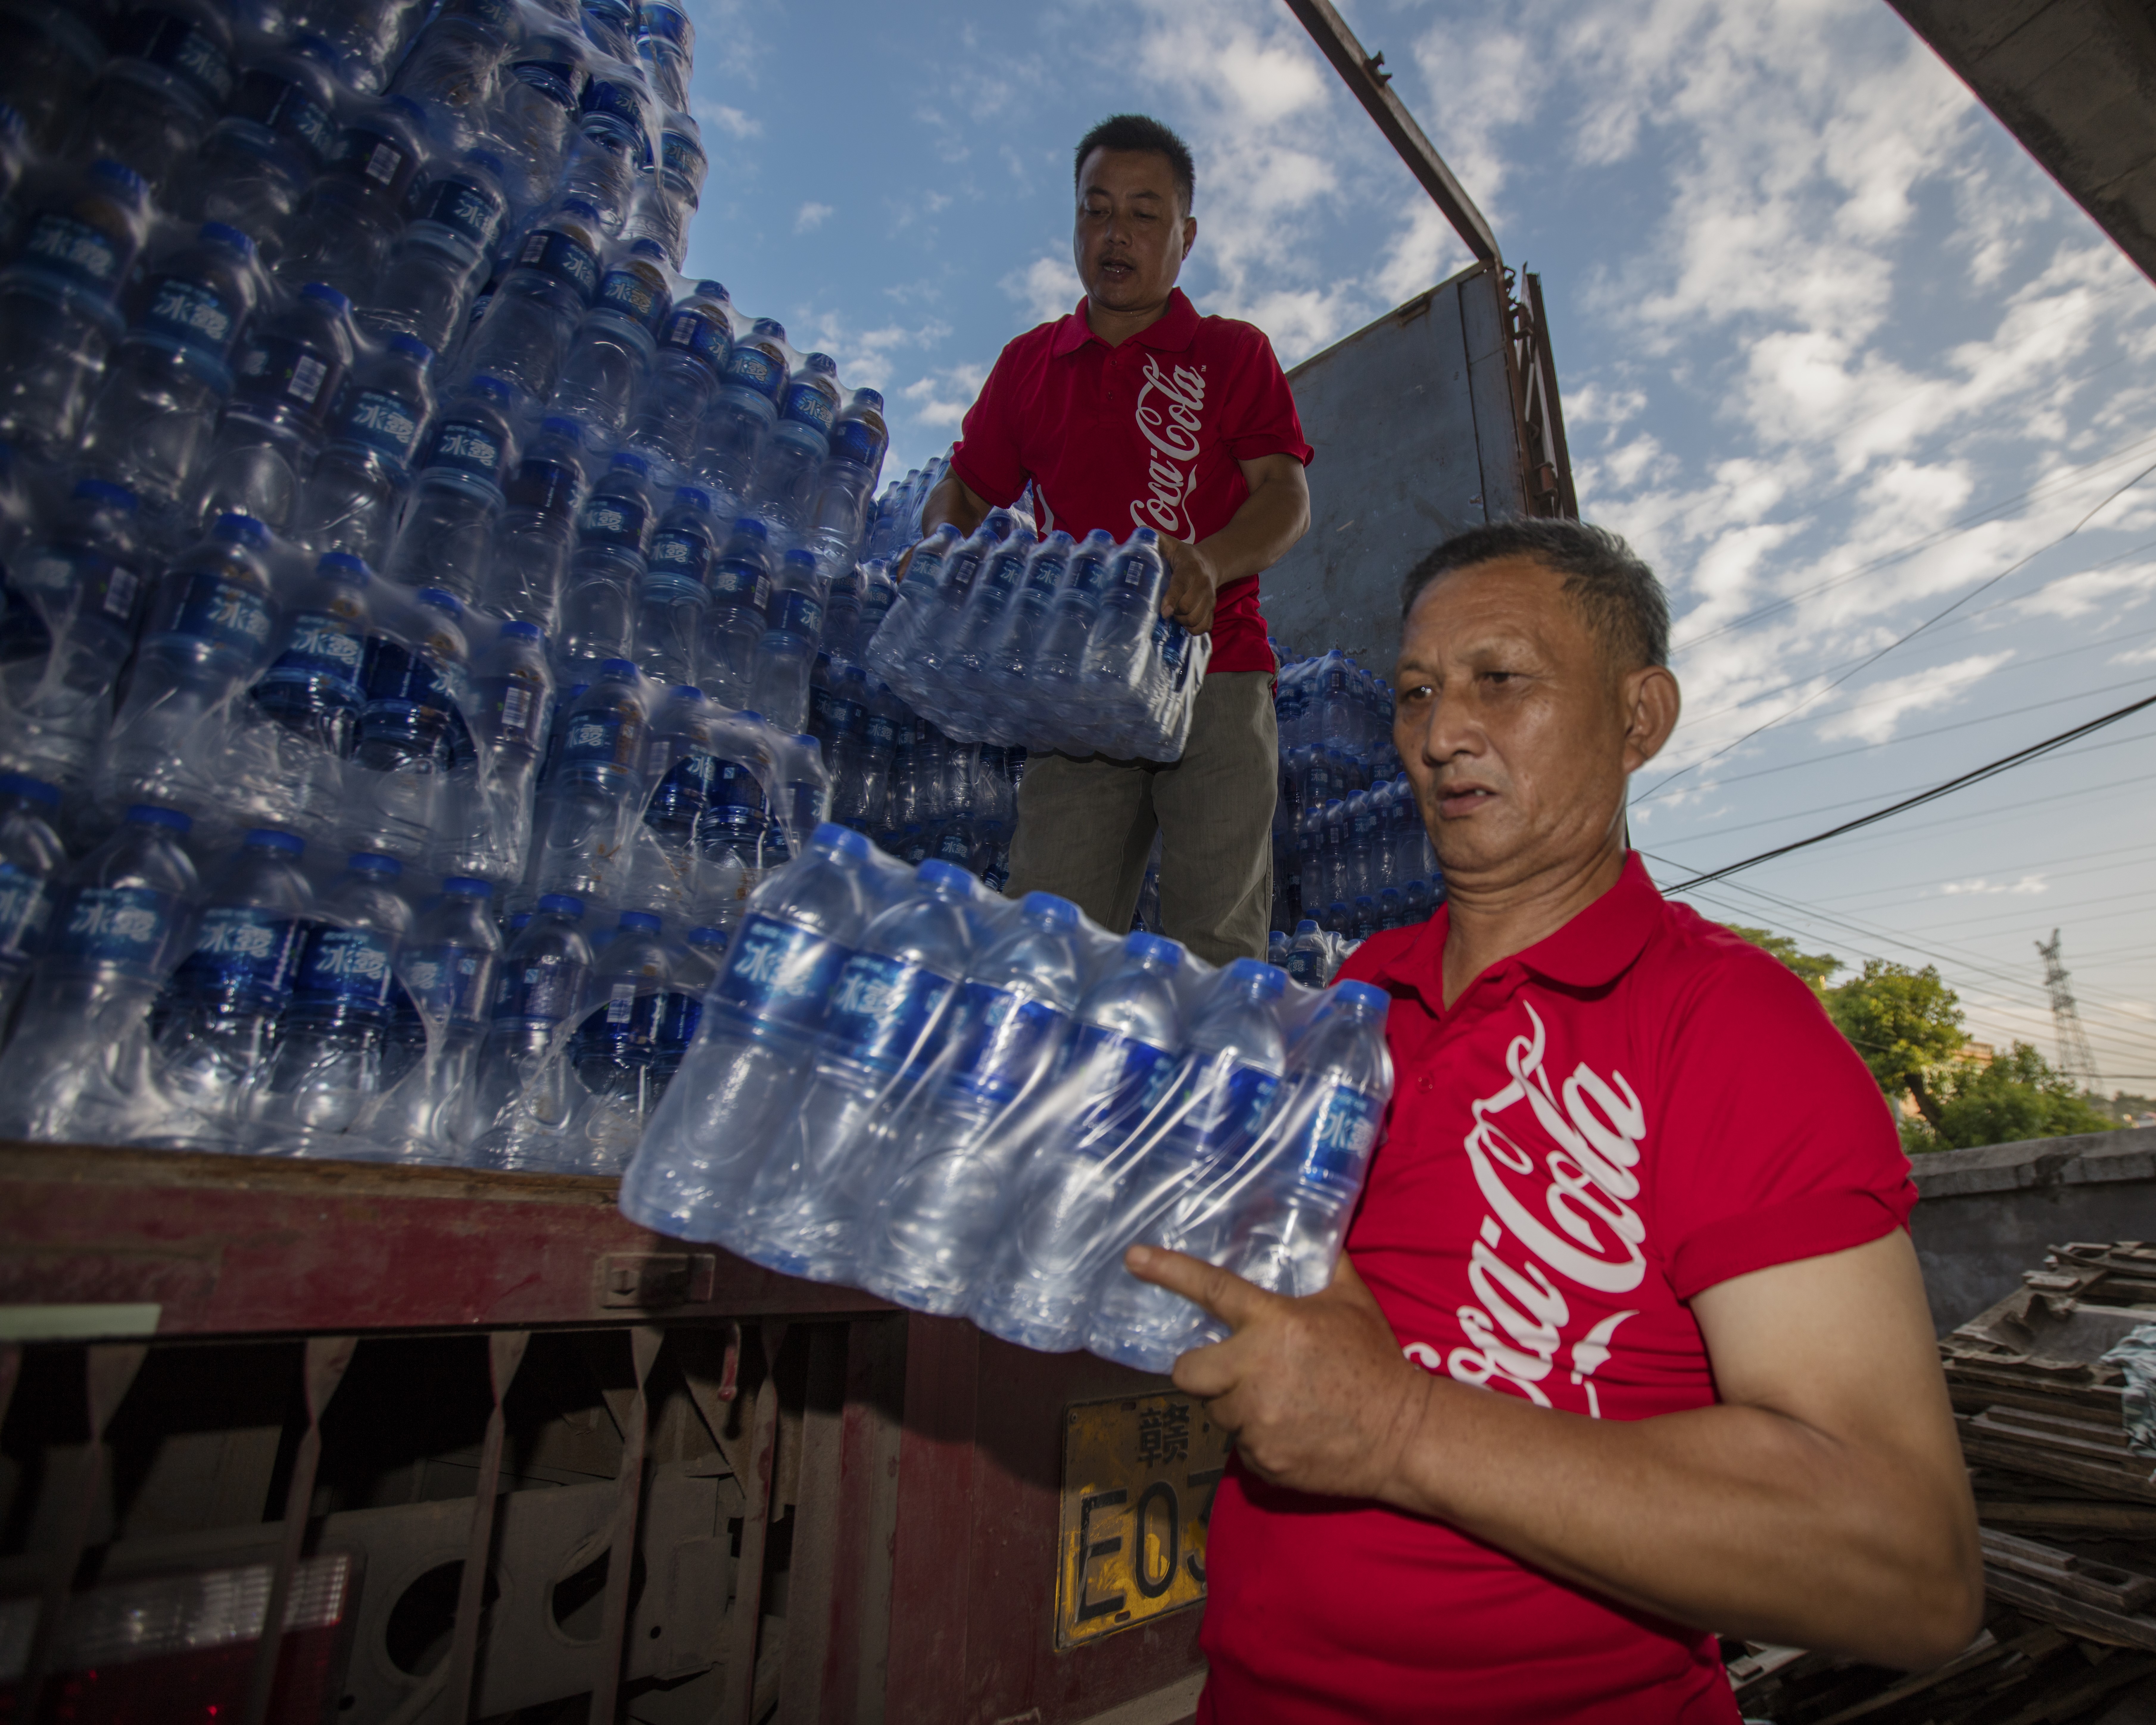 Company employees deliver bottled water for disaster relief